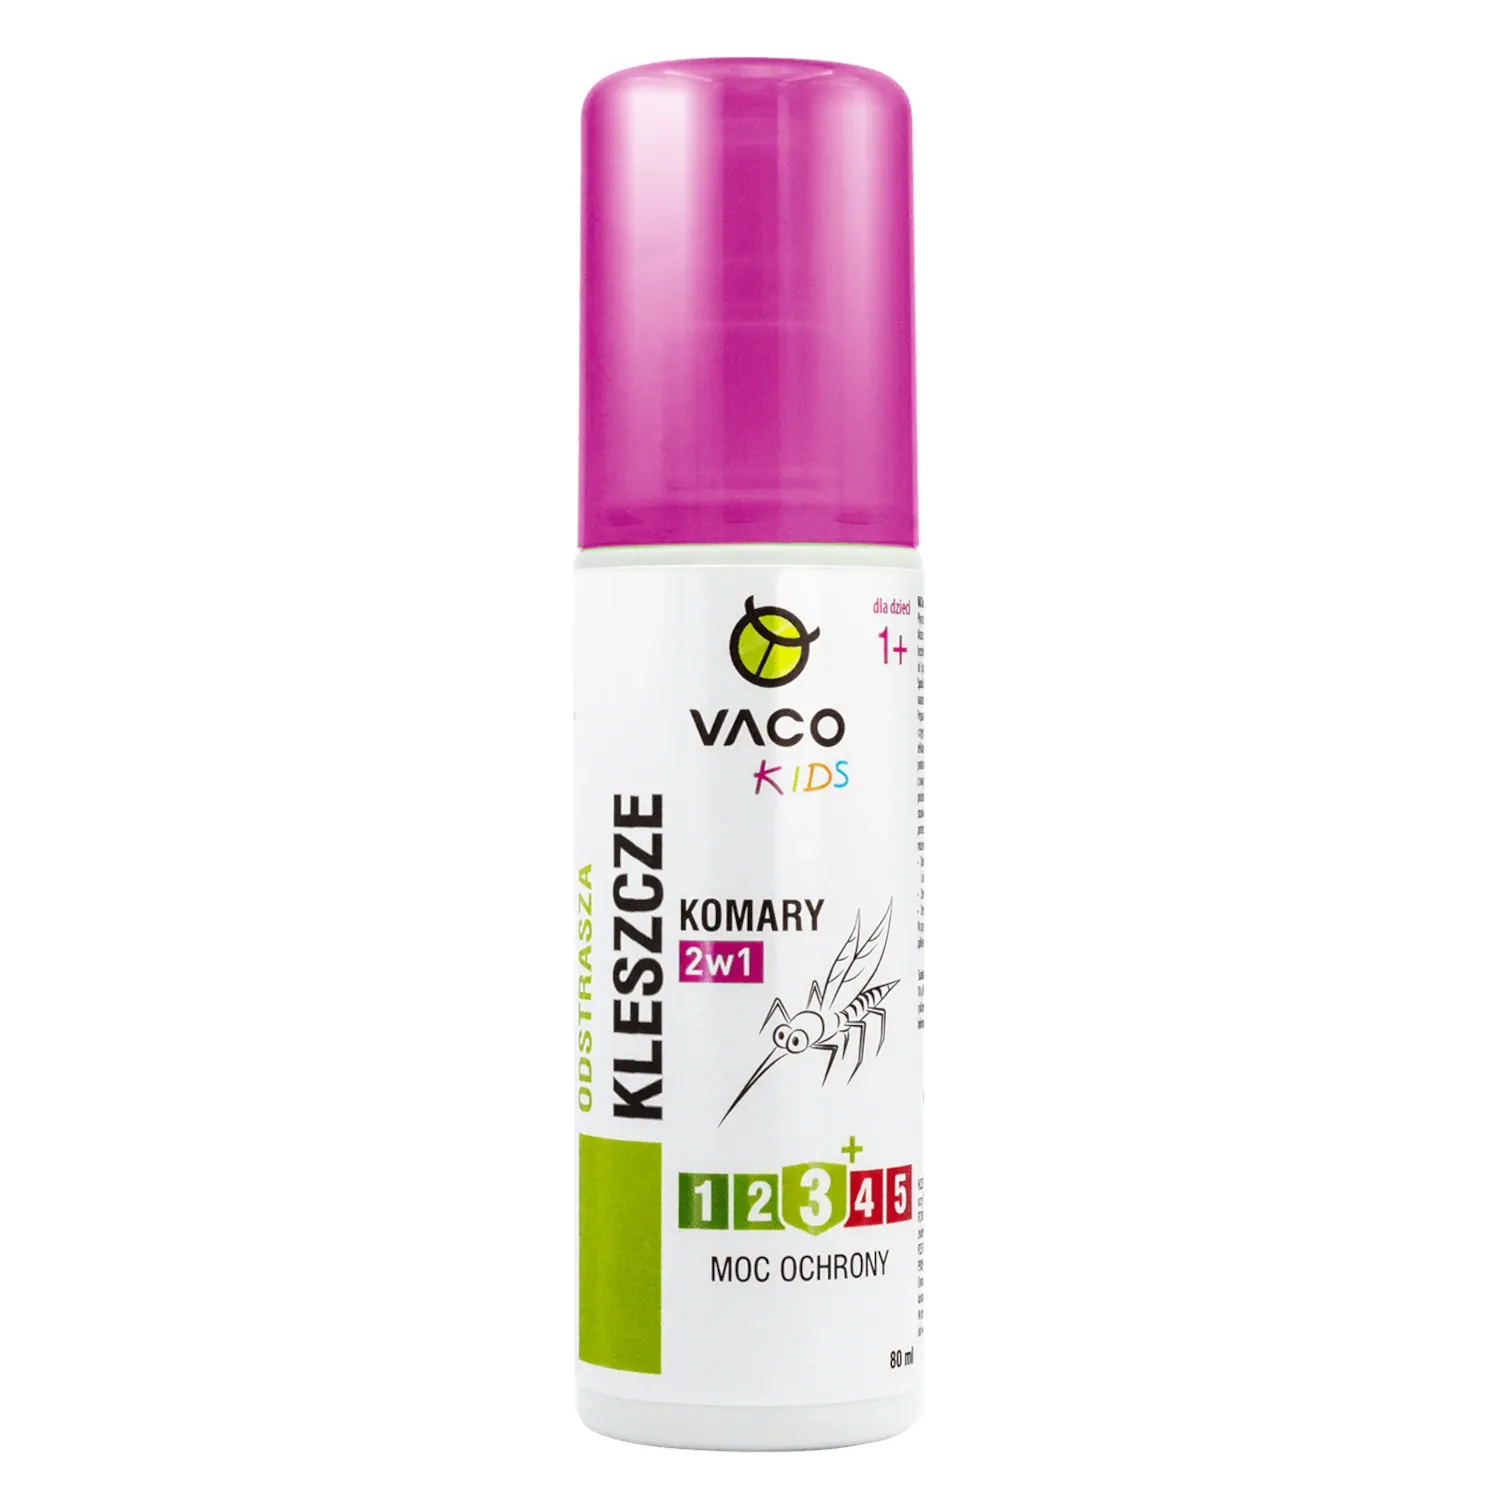 VACO KIDS LIQUID AGAINST TICKS AND MOSQUITOES FOR CHILDREN (PUMP SPRAY)